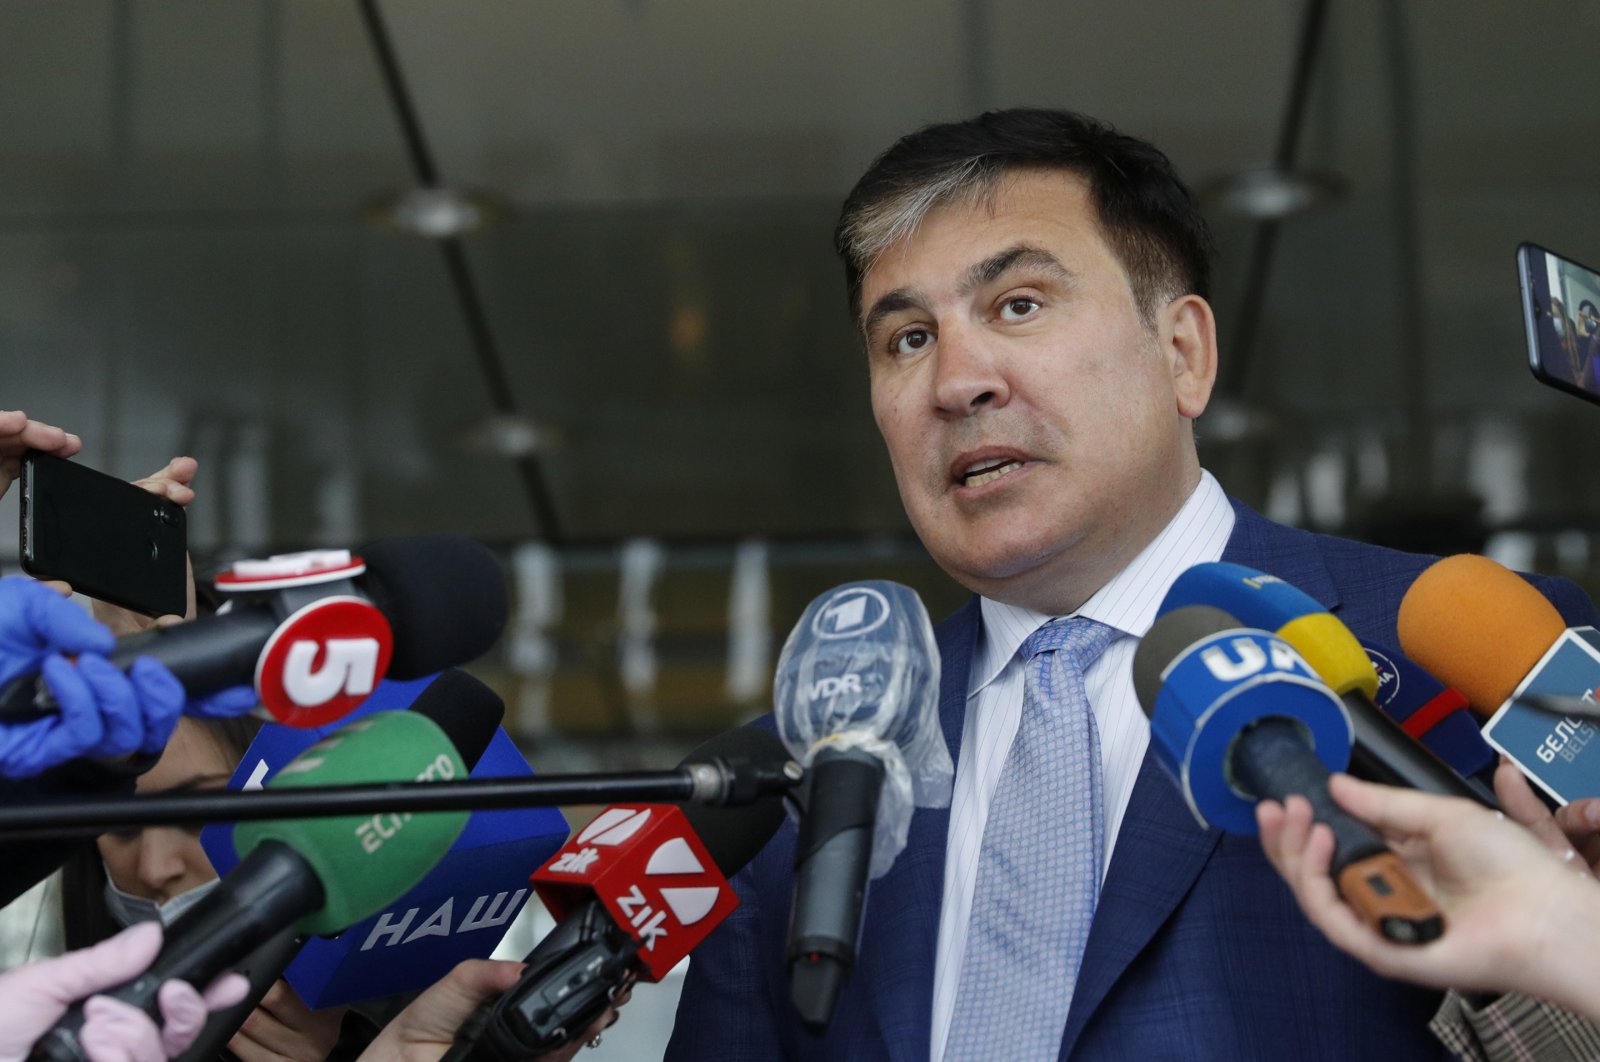 Georgia's former President Mikheil Saakashvili speaks with journalists after his meeting with members of Ukraine's Servant of the People parliament fraction, Kyiv, Ukraine, April 24, 2020. (Reuters Photo)